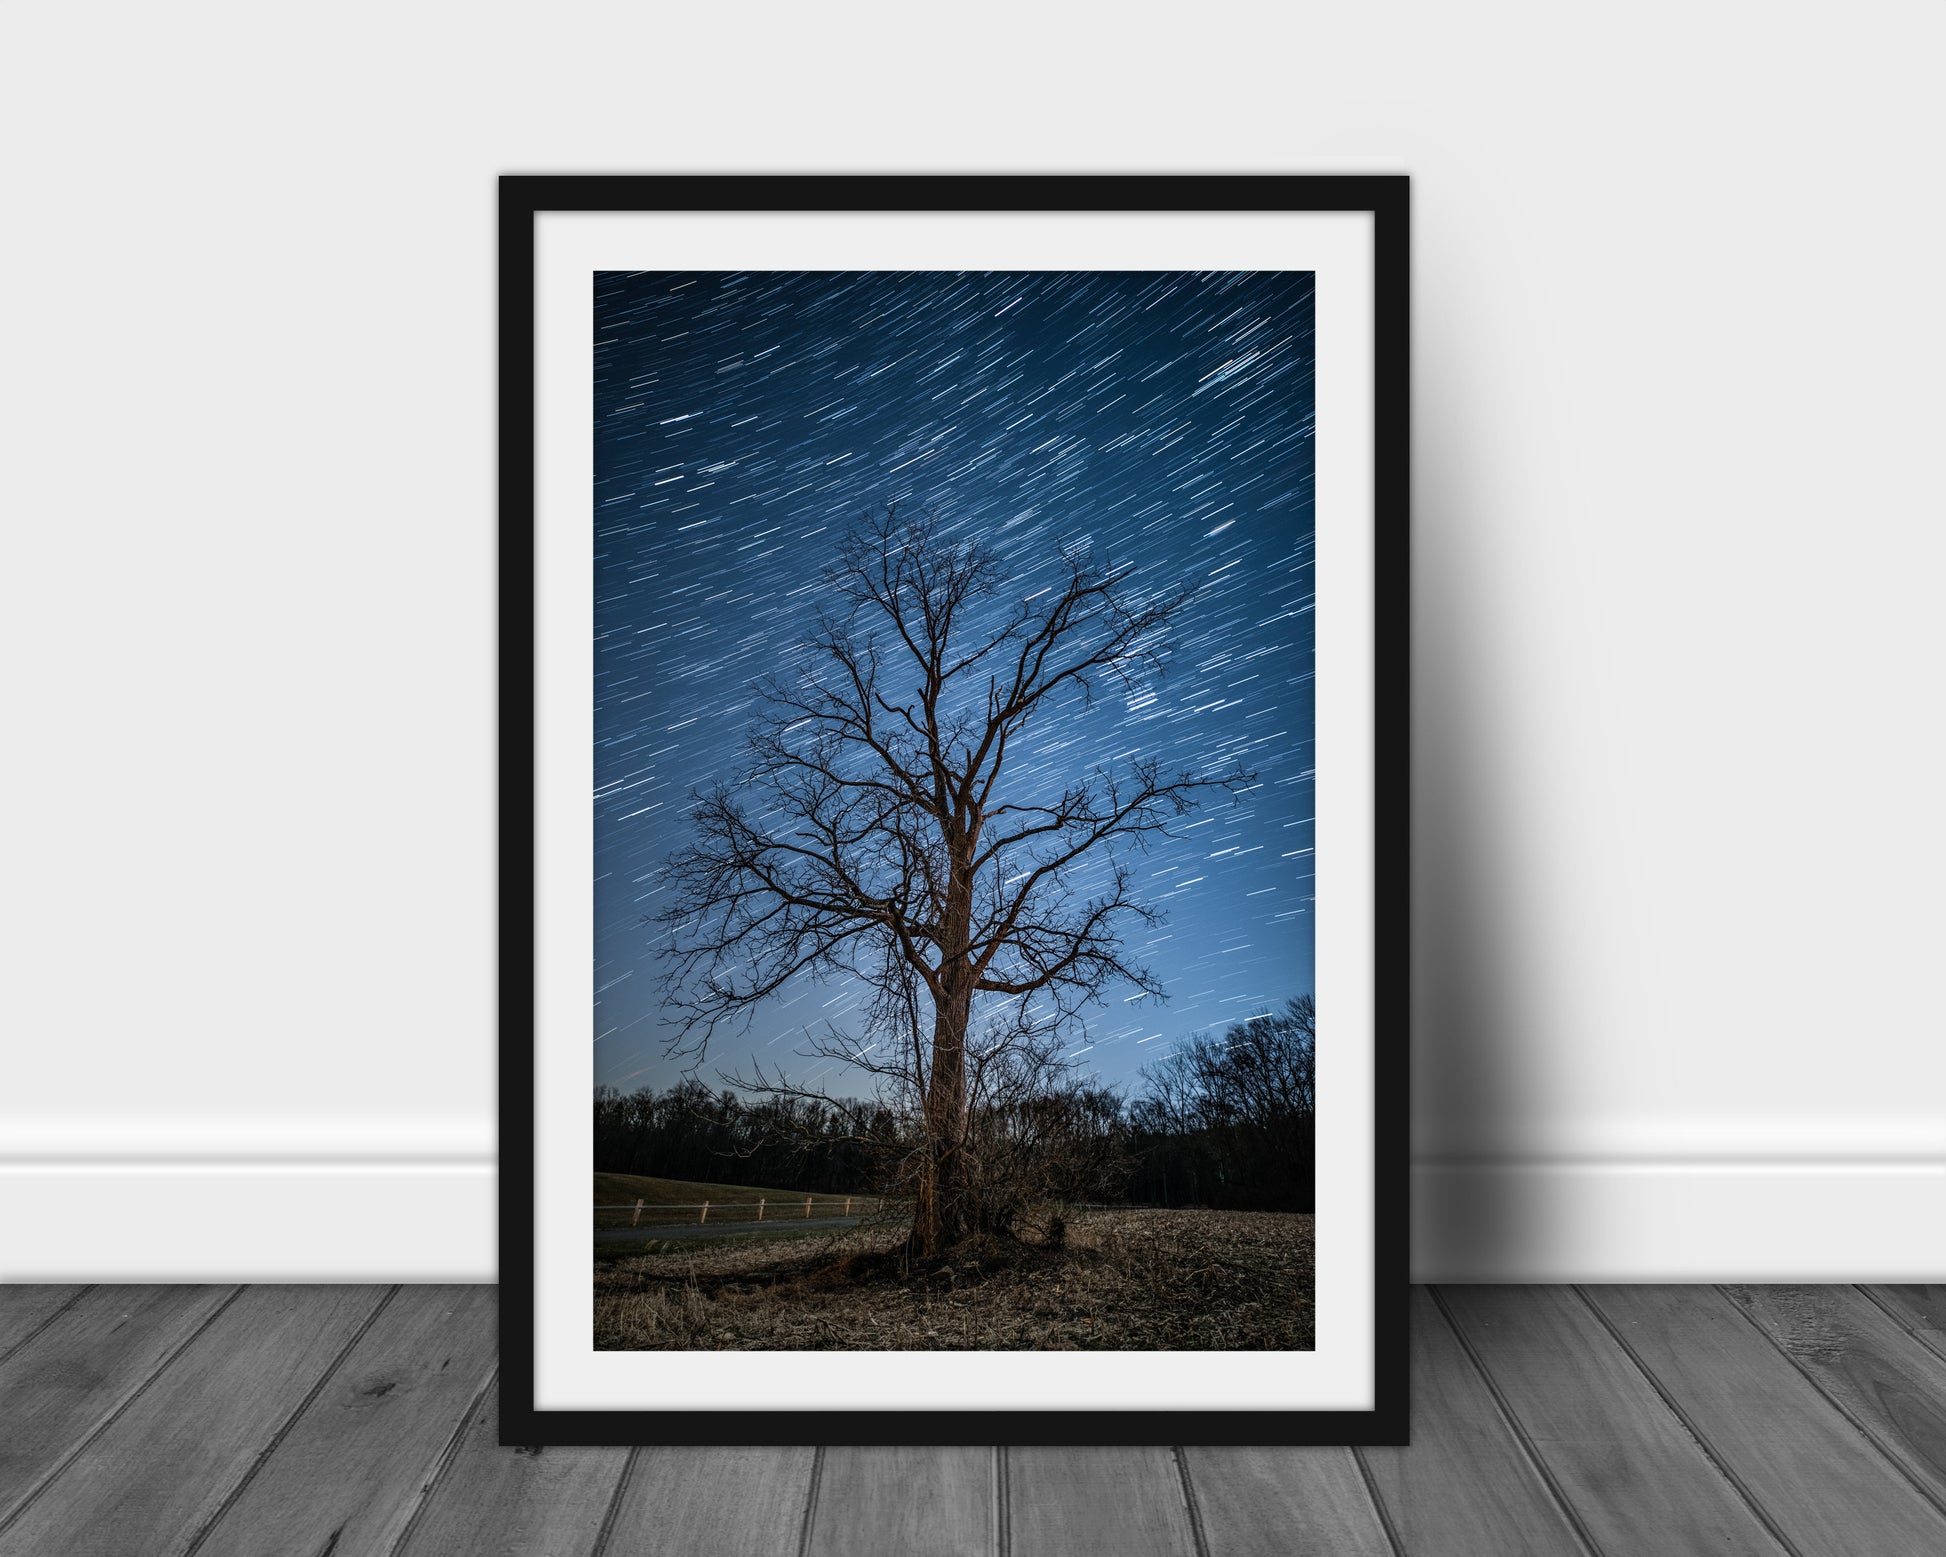 Old Tree and Star Trails, Night, Milky Way, Nature Photography Prints, Adventure Print, Landscape Wall Art